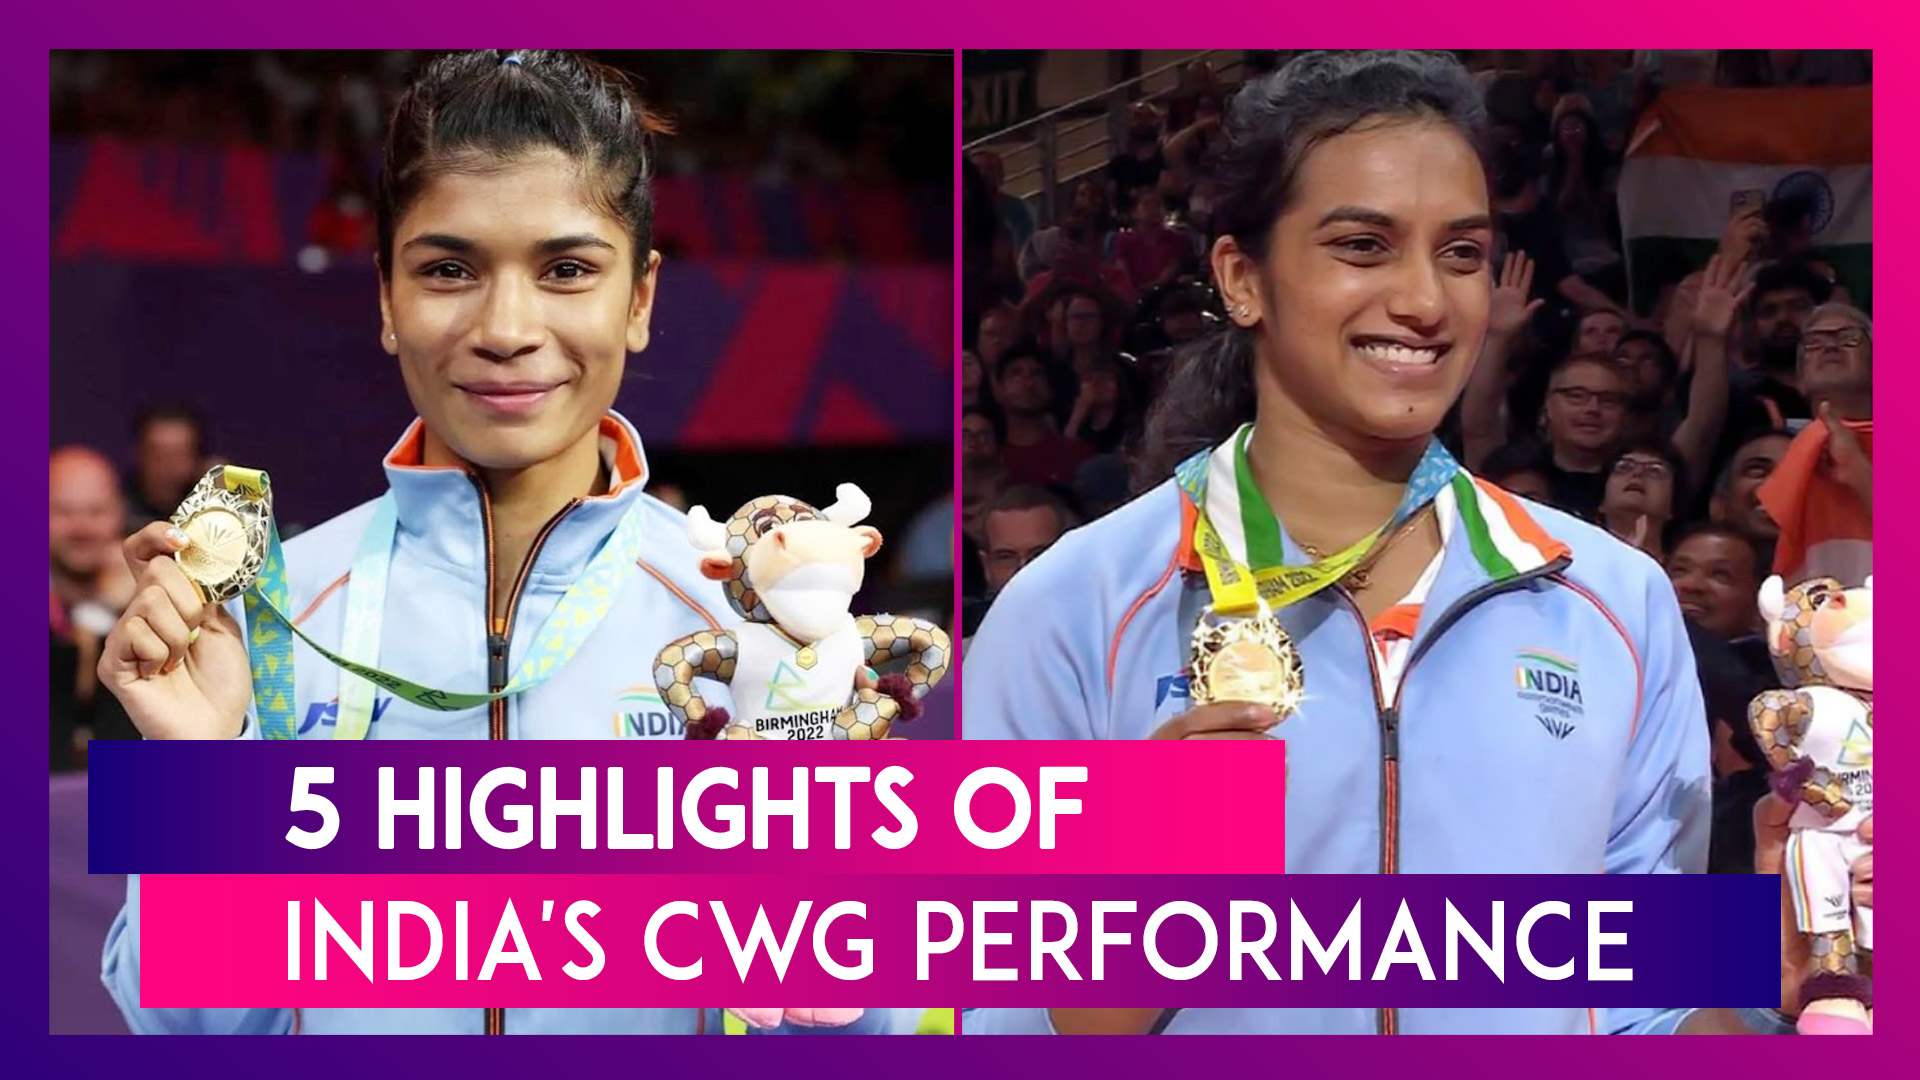 CWG 2022 5 Highlights of Indias Performance in Birmingham 📹 Watch Videos From LatestLY